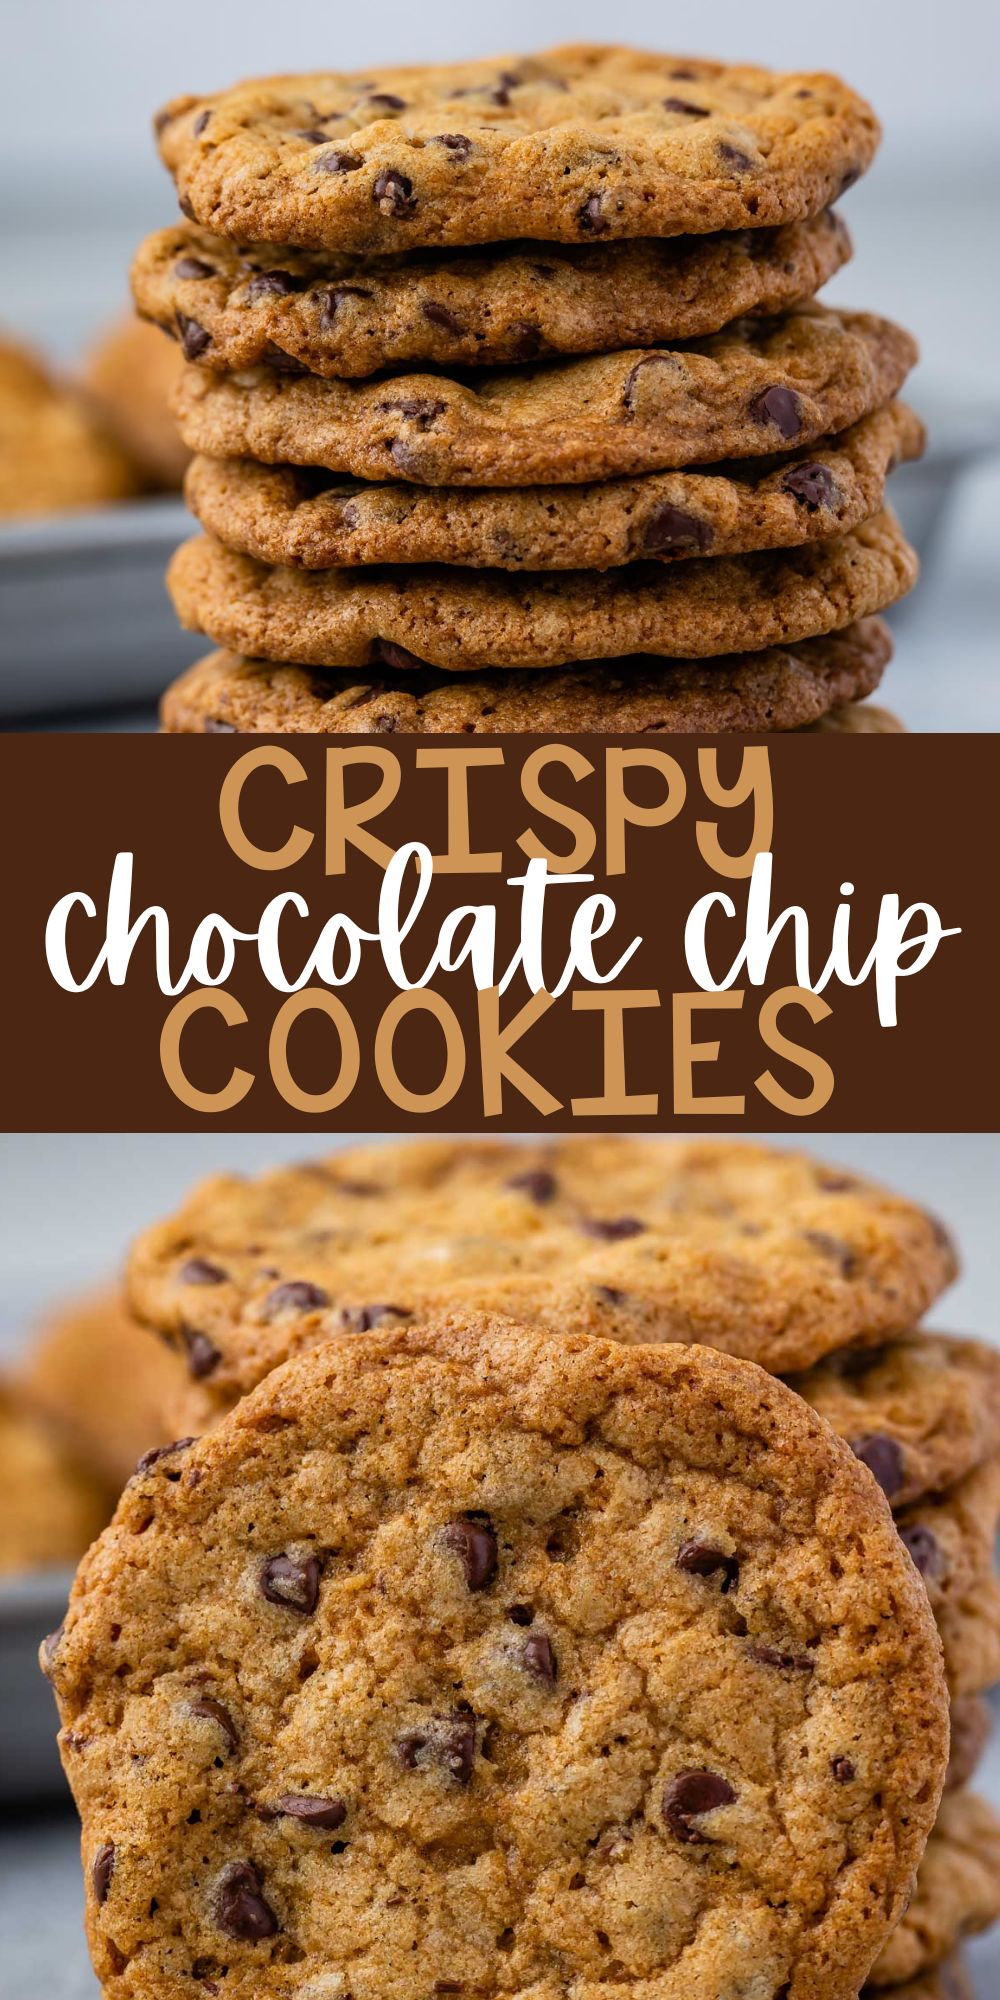 two photos of large stack of chocolate chip cookies with words on the image.